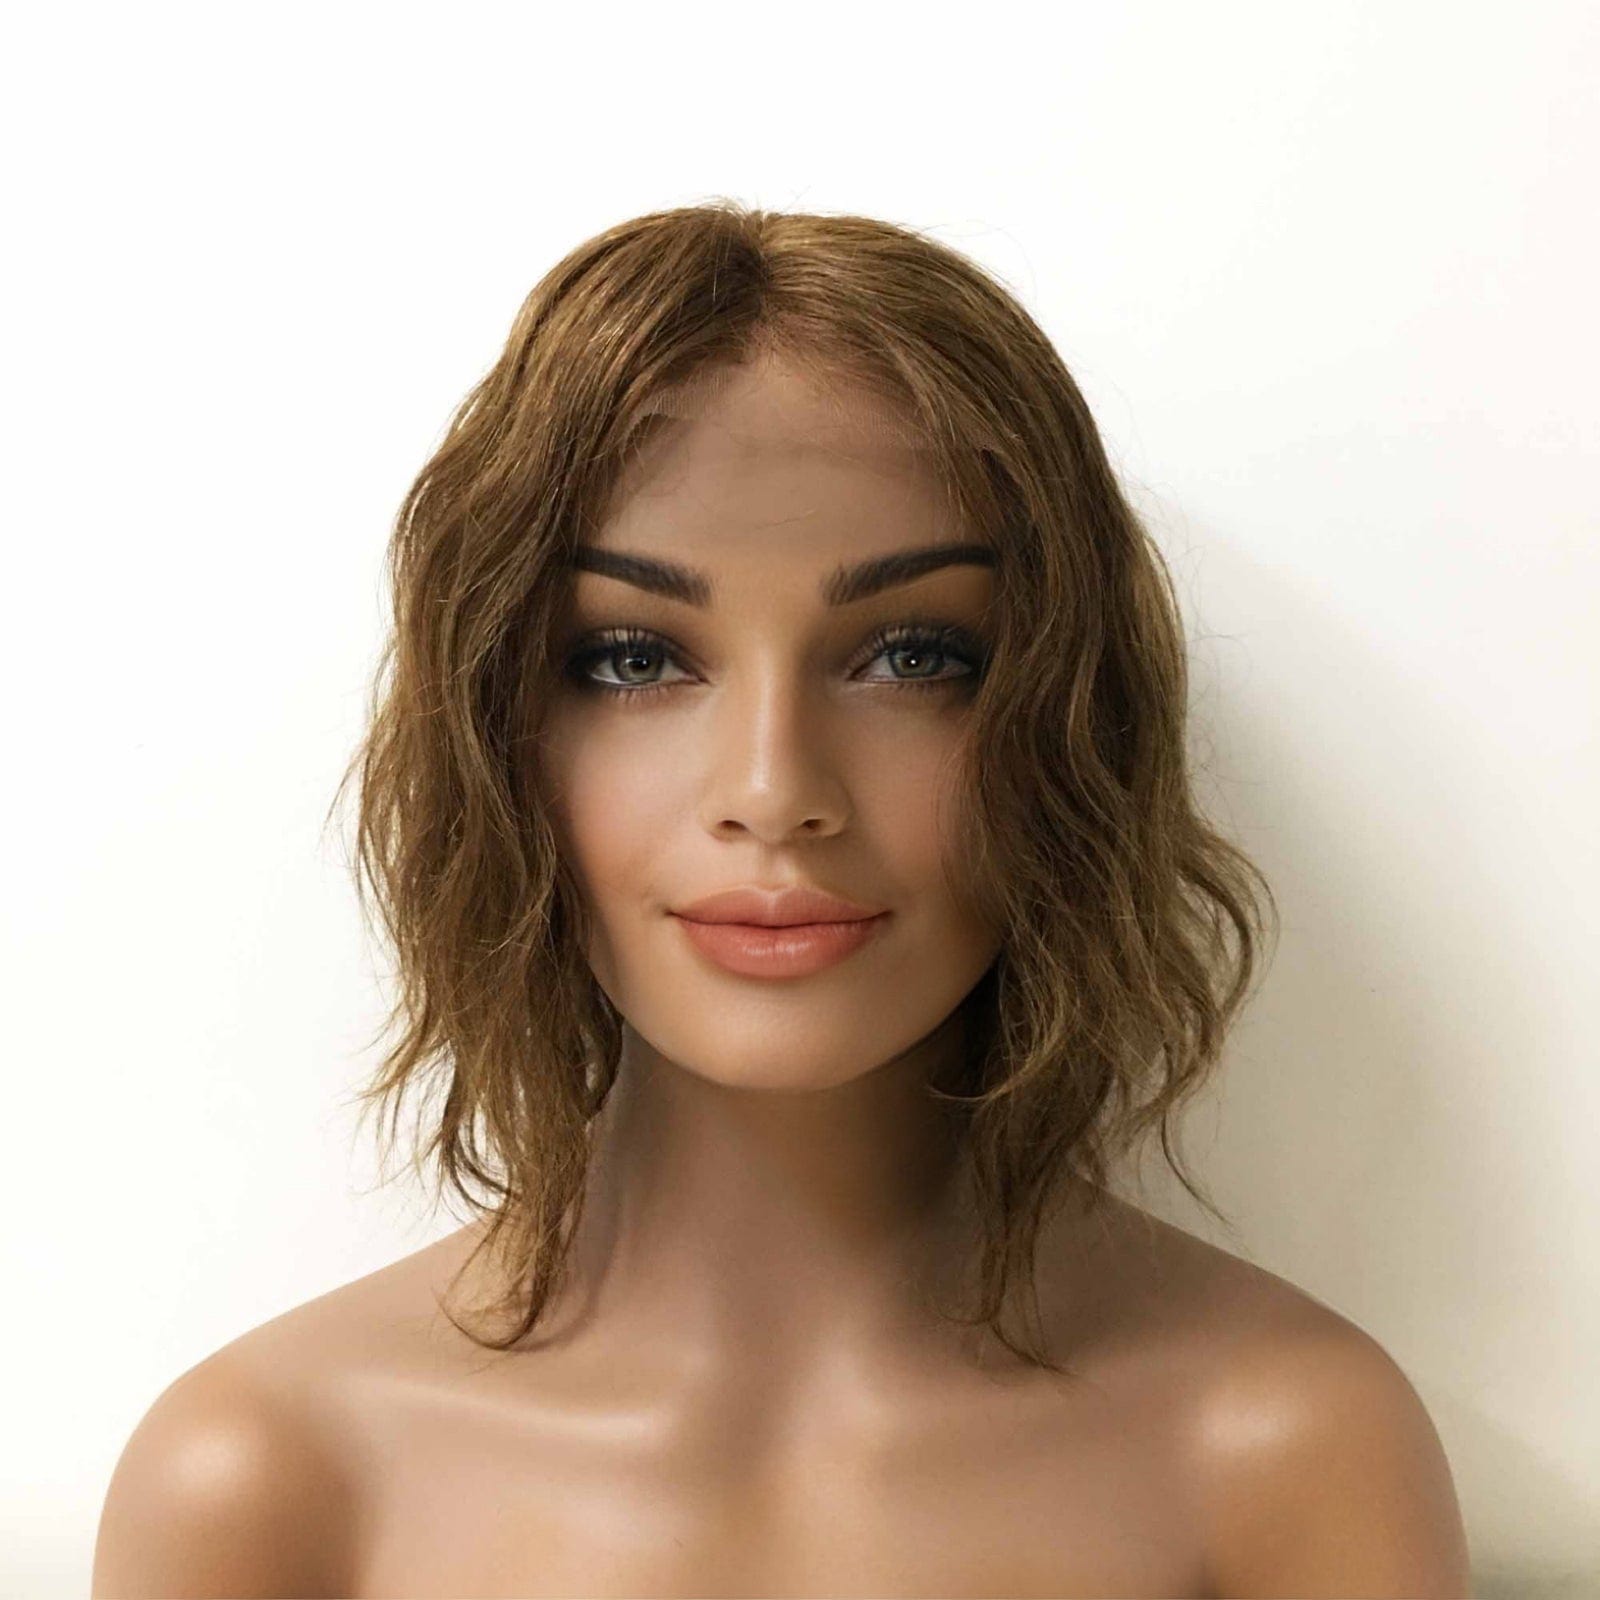 nevermindyrhead Women Brown Human Hair Lace Front Short Curly Middle Part Wig